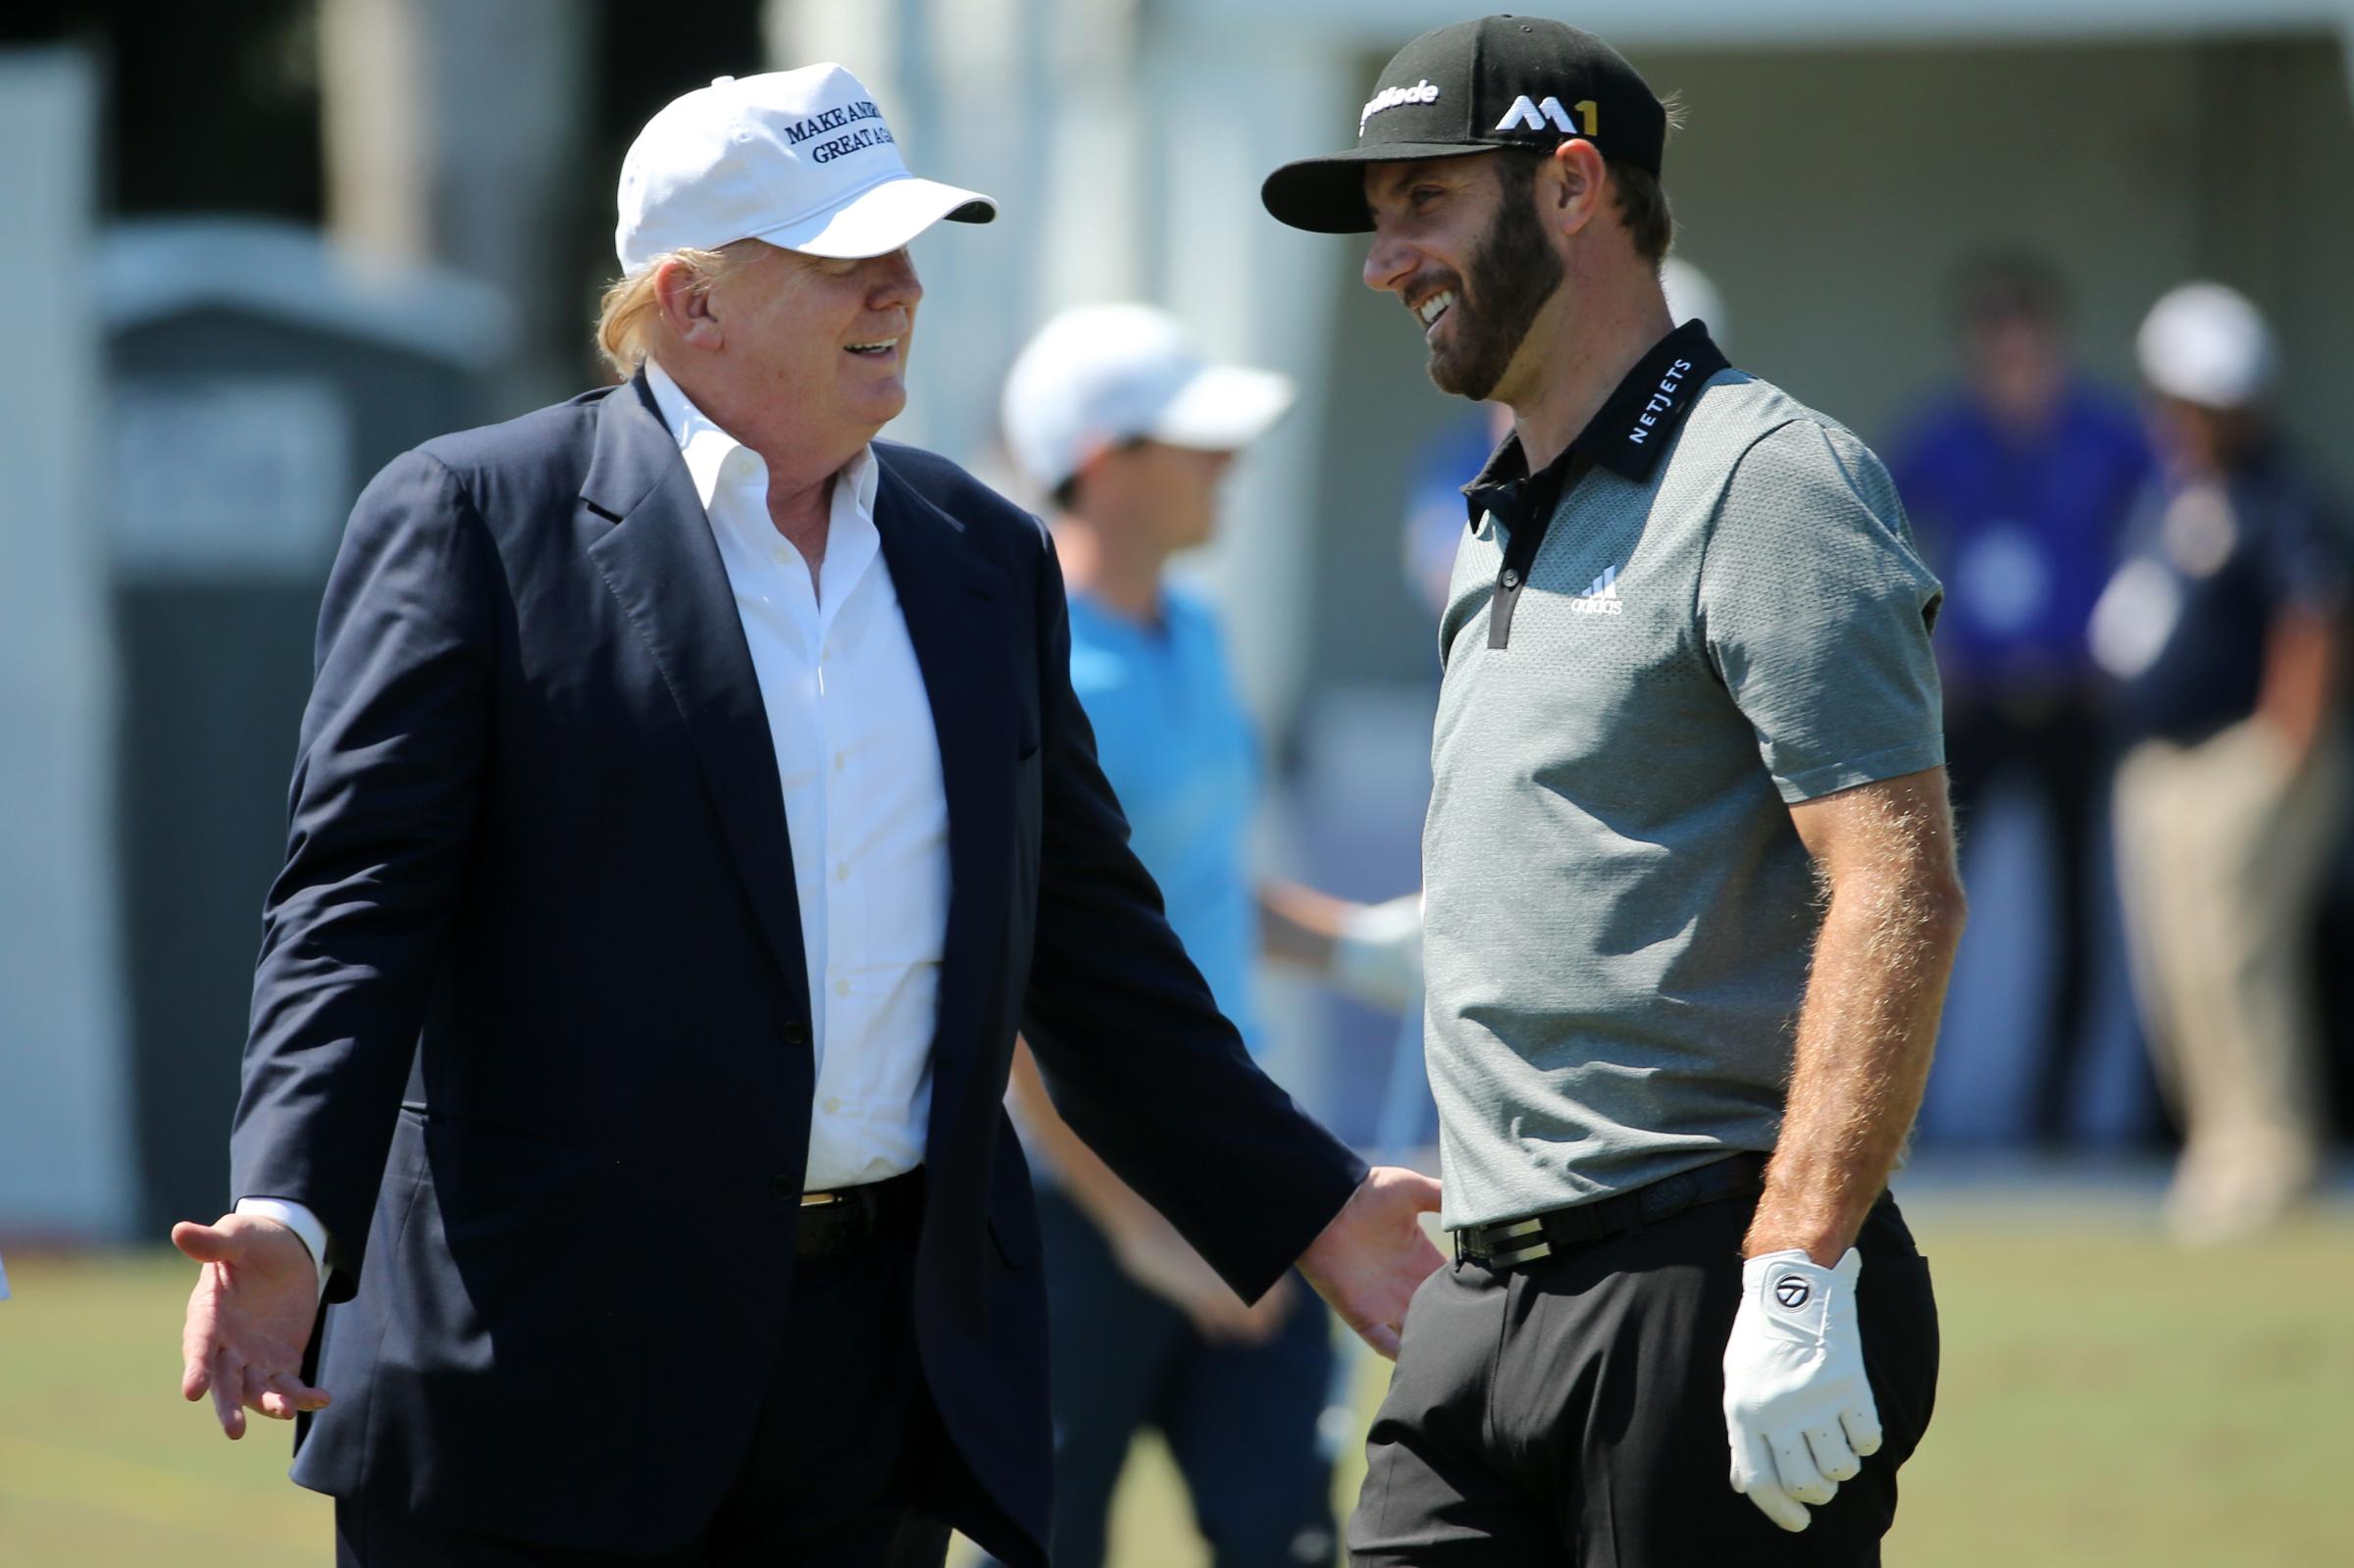 Donald Trump speaks with golfer Dustin Johnson at Trump National Doral Blue Monster Course on March 6, 2016 in Doral, Fla.